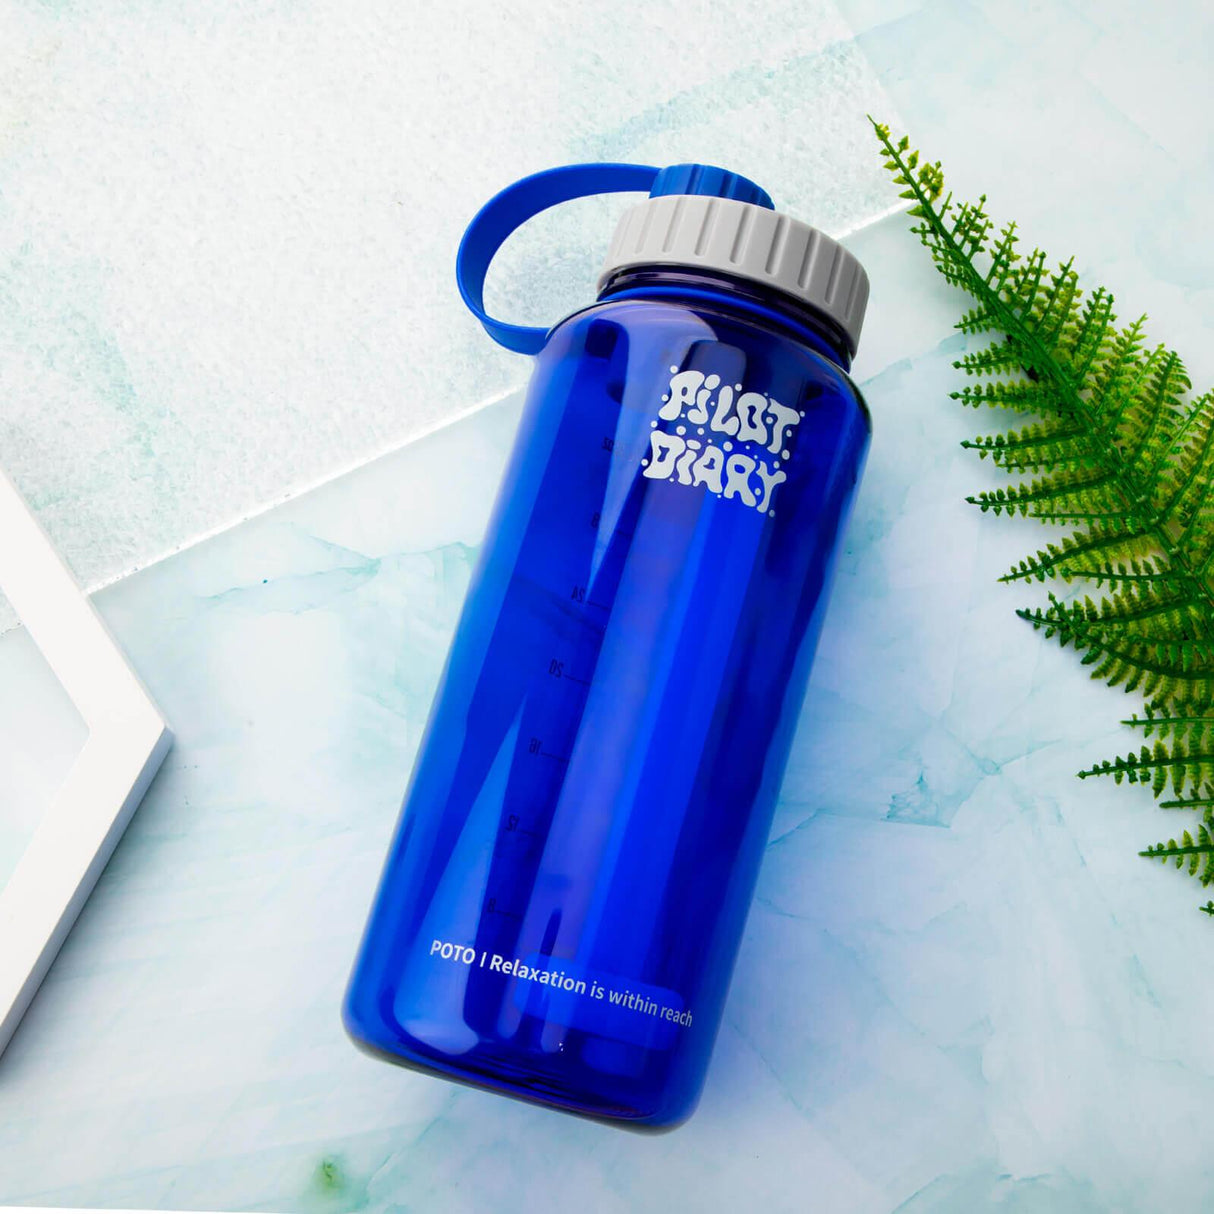 PILOT DIARY POTO Water Bottle Bong in Blue - Angled View on Marble Background